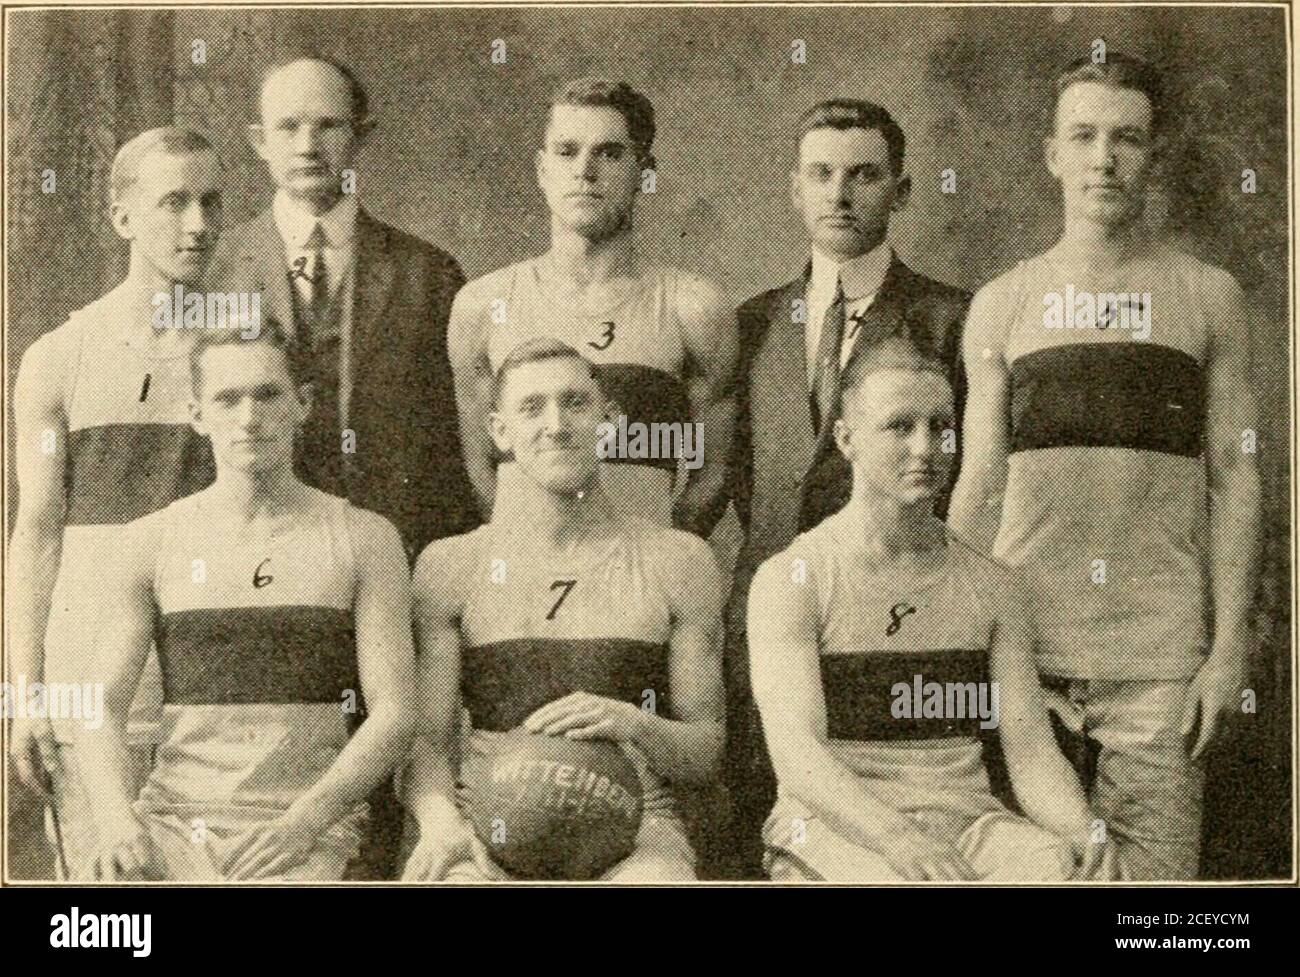 . Spalding's official collegiate basket ball guide. ard, 11. 1905-06—Prince., 8; Harvard, 36. Prince., 13; Harvard, 34.1906-07—Prince., 12; Harvard, 17. Prince., 32; Harvard, 20.1908-09—Prince., 23; Harvard, 20. CORNELL—YALE. Yale, 49.Yale, 22.Yale, 42.Yale, 14.Yale, 13.Yale, 32.Yale, 10.Yale, 28.Yale, 35.Yale, 6. 1905-06—Cnrnell, Cornell,[906-07—Cornell, Cornell,1907-08—Cornell, Cornell,I—Cornell, Cornell,2—Cornell, Cornell. 1910- 18; Yale, 29. 7; Yale, 31.21; Yale, 26. 9; Yale, 41.17; Yale, 20.16; Yale, 18.16; Yale, 26.20; Yale, 17.33; Yale, 17.27; Yale, 13. YALE—HARVARD. 1900-0T—Vale,1901-0 Stock Photo